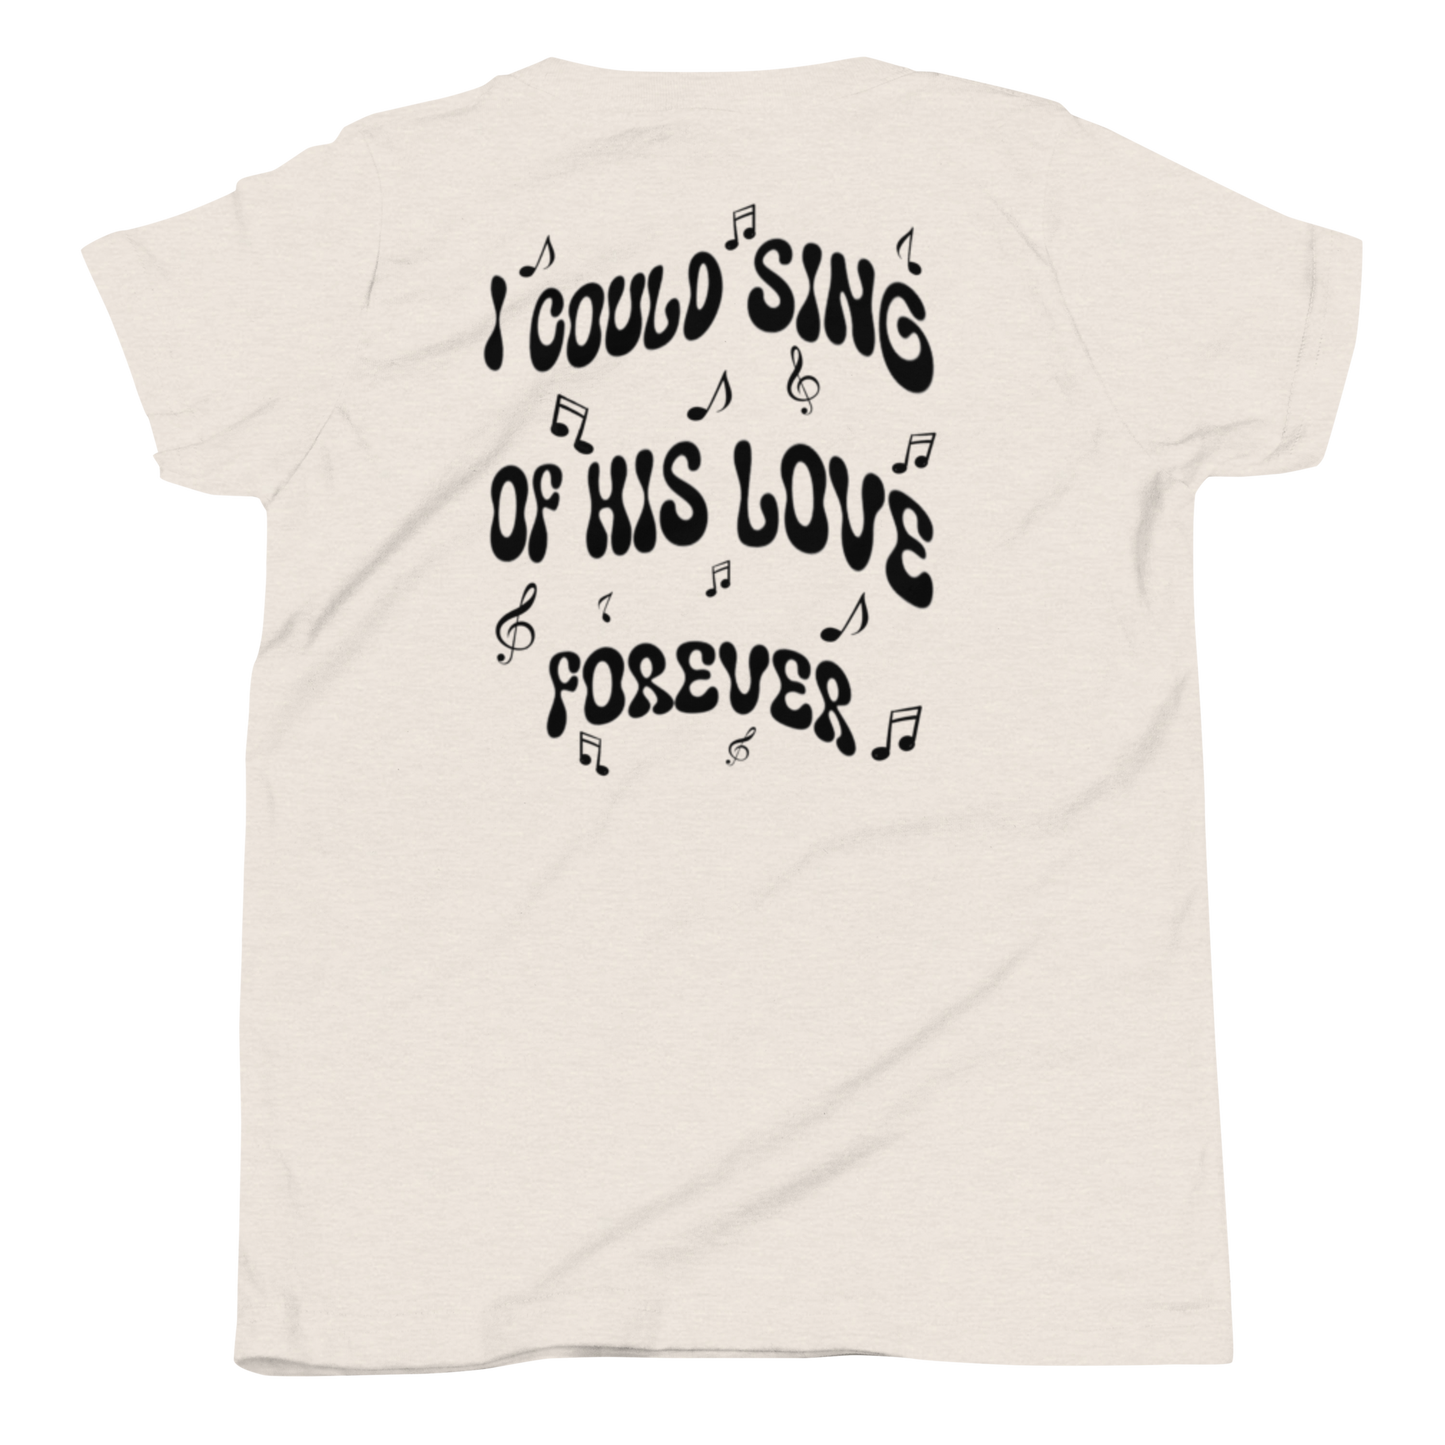 I Could Sing of His Love - Kids Tee